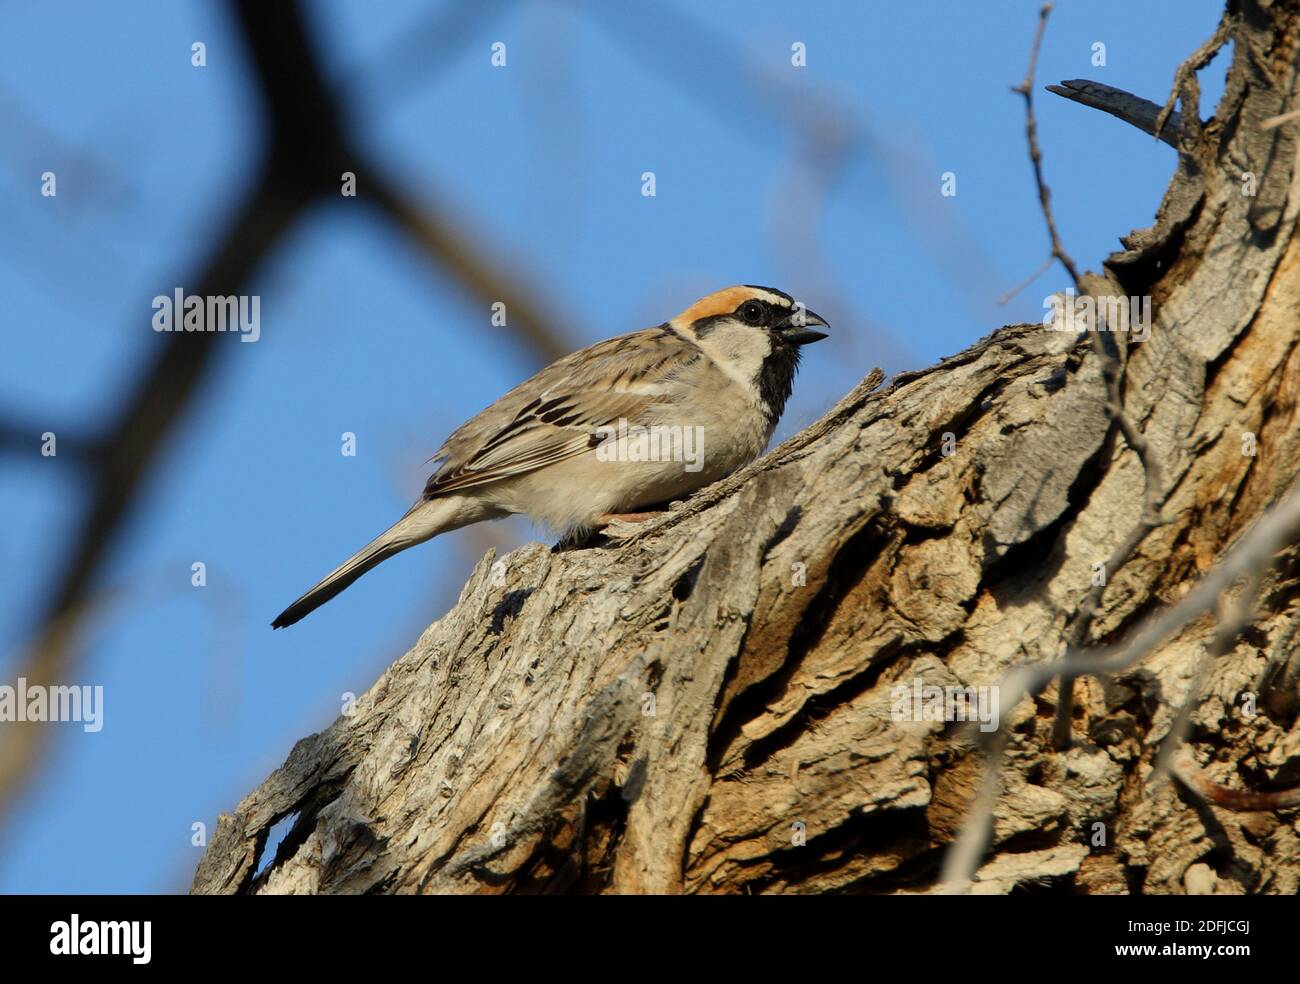 Saxaul Sparrow (Passer ammodendri nigricans) adult perched on tree trunk calling  Almaty province, Kazakhstan         June Stock Photo